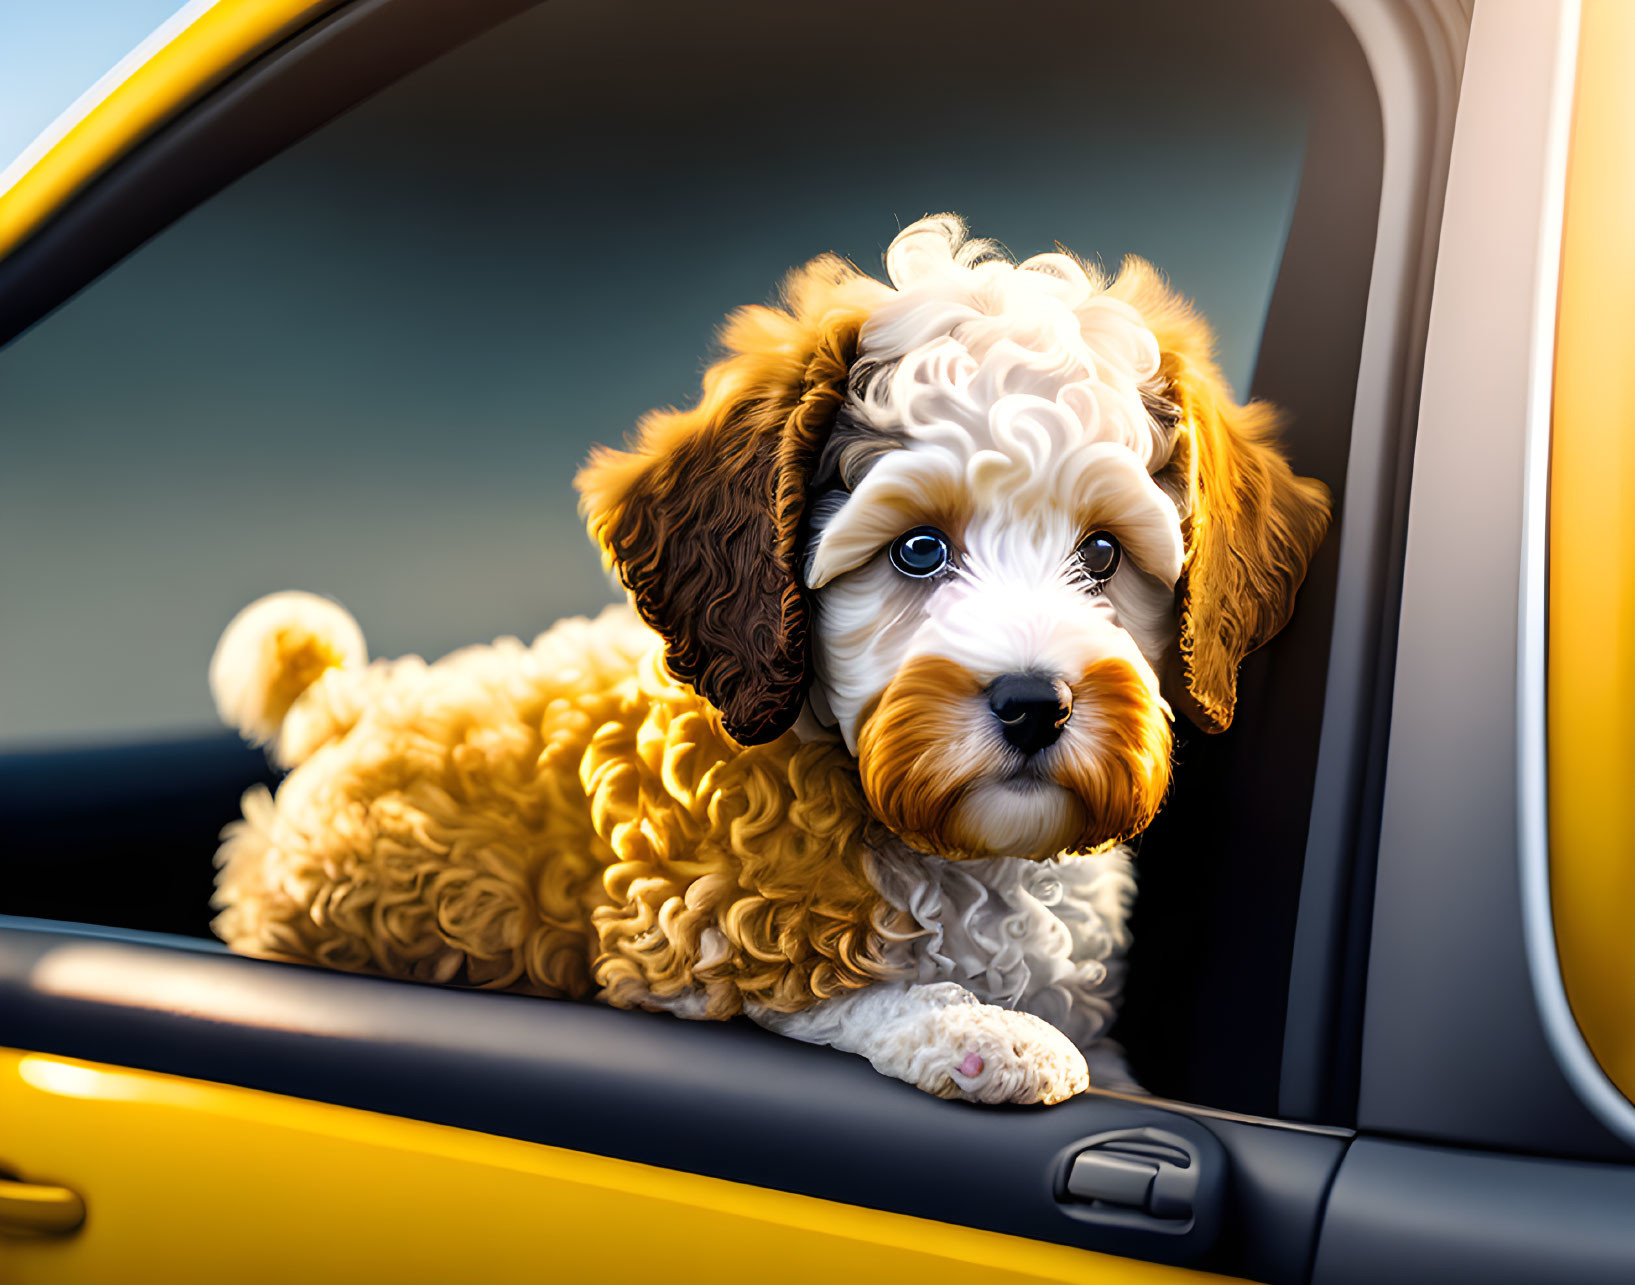 Brown and White Puppy in Yellow Car at Sunset